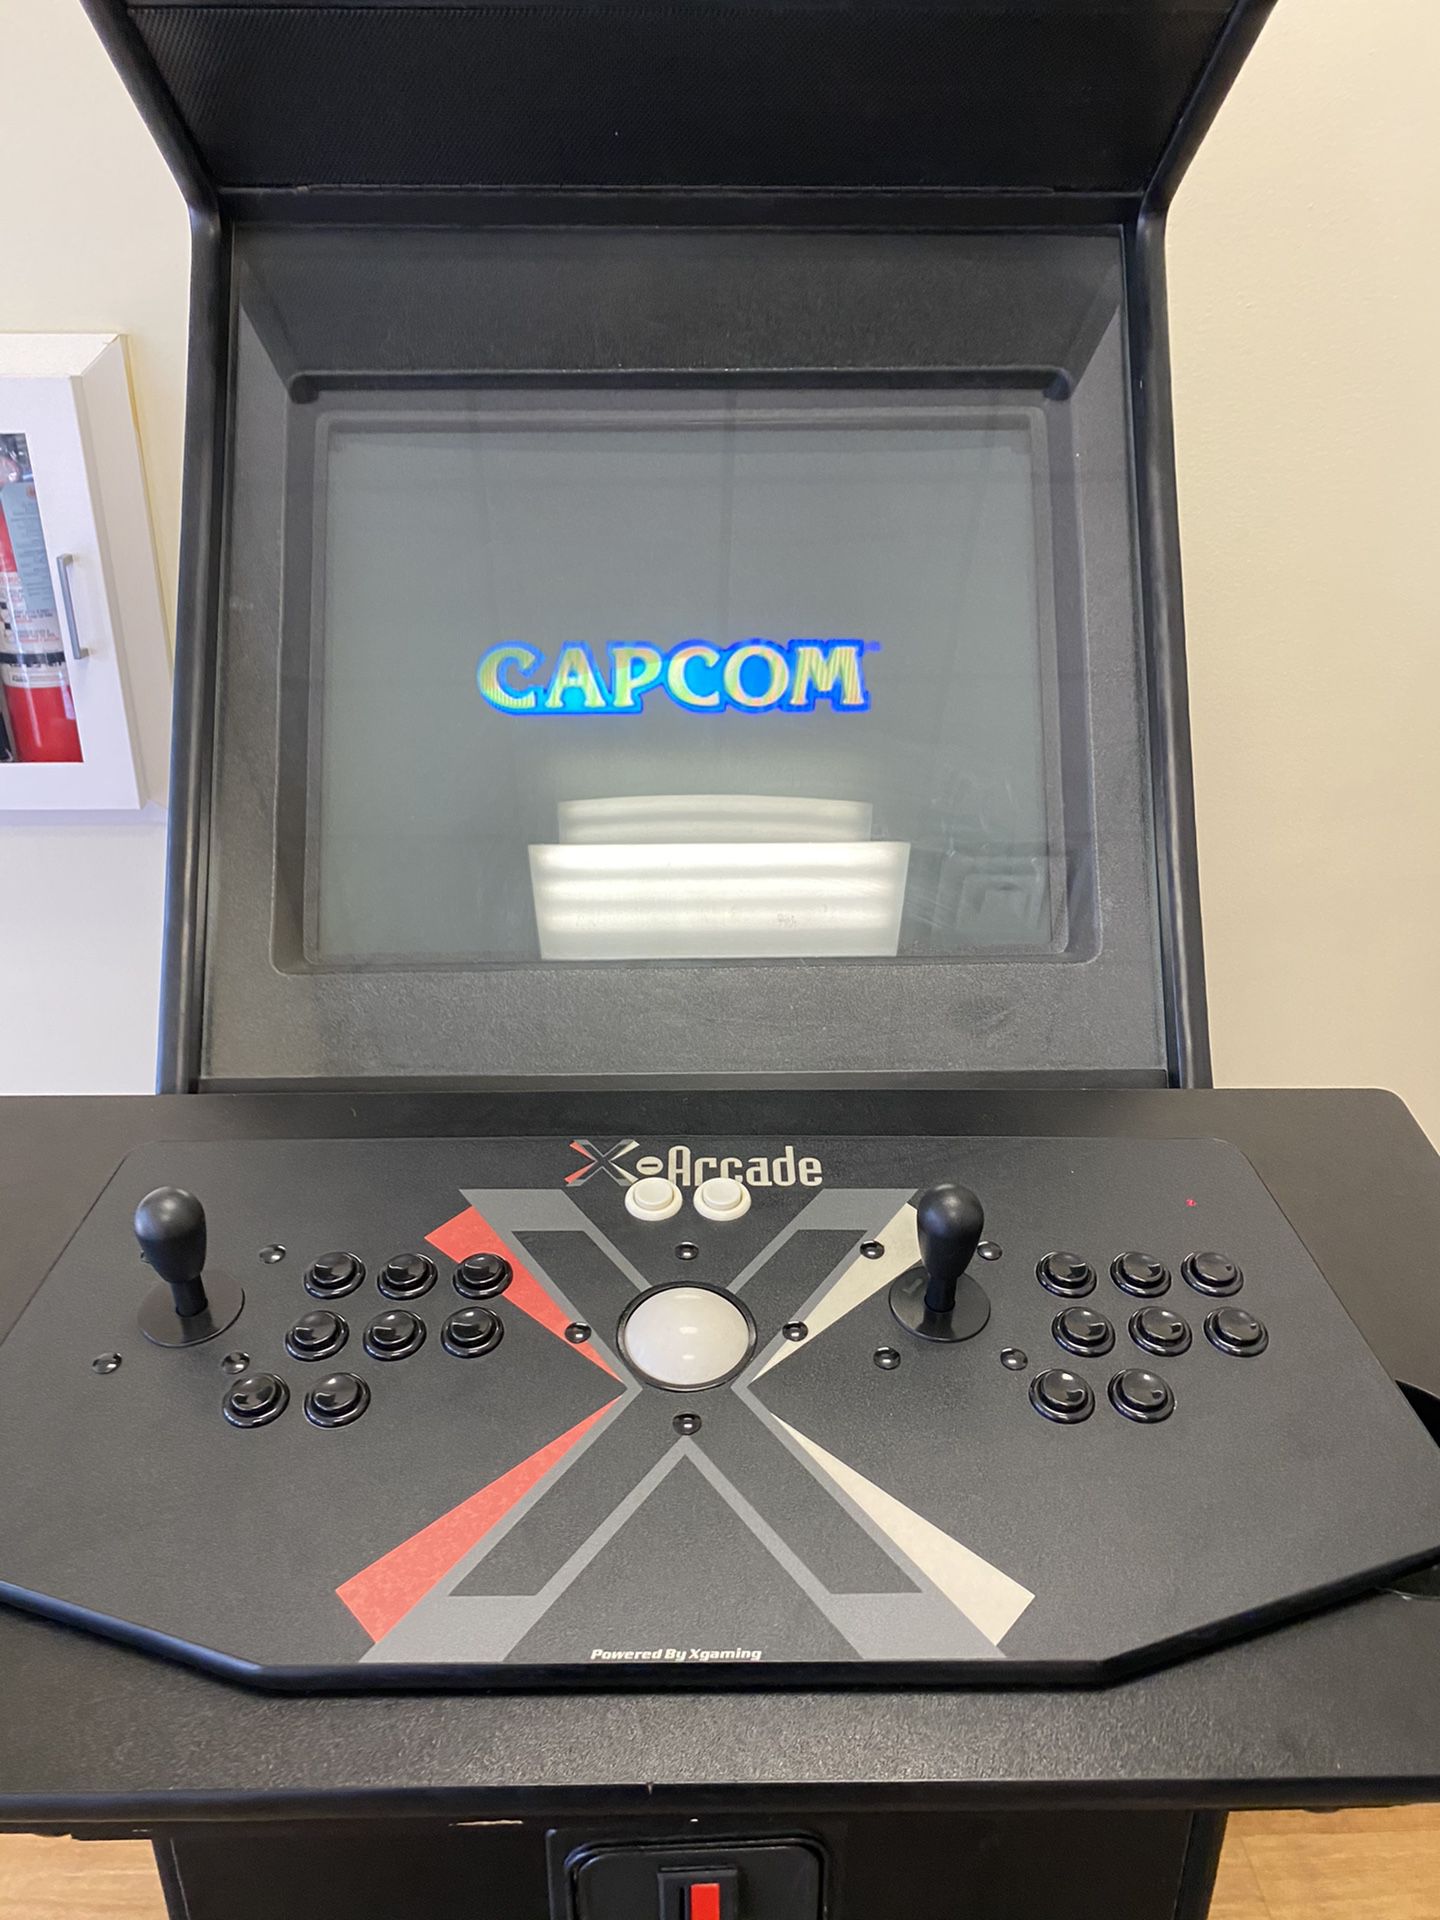 Fully Functional Arcade system with PS2